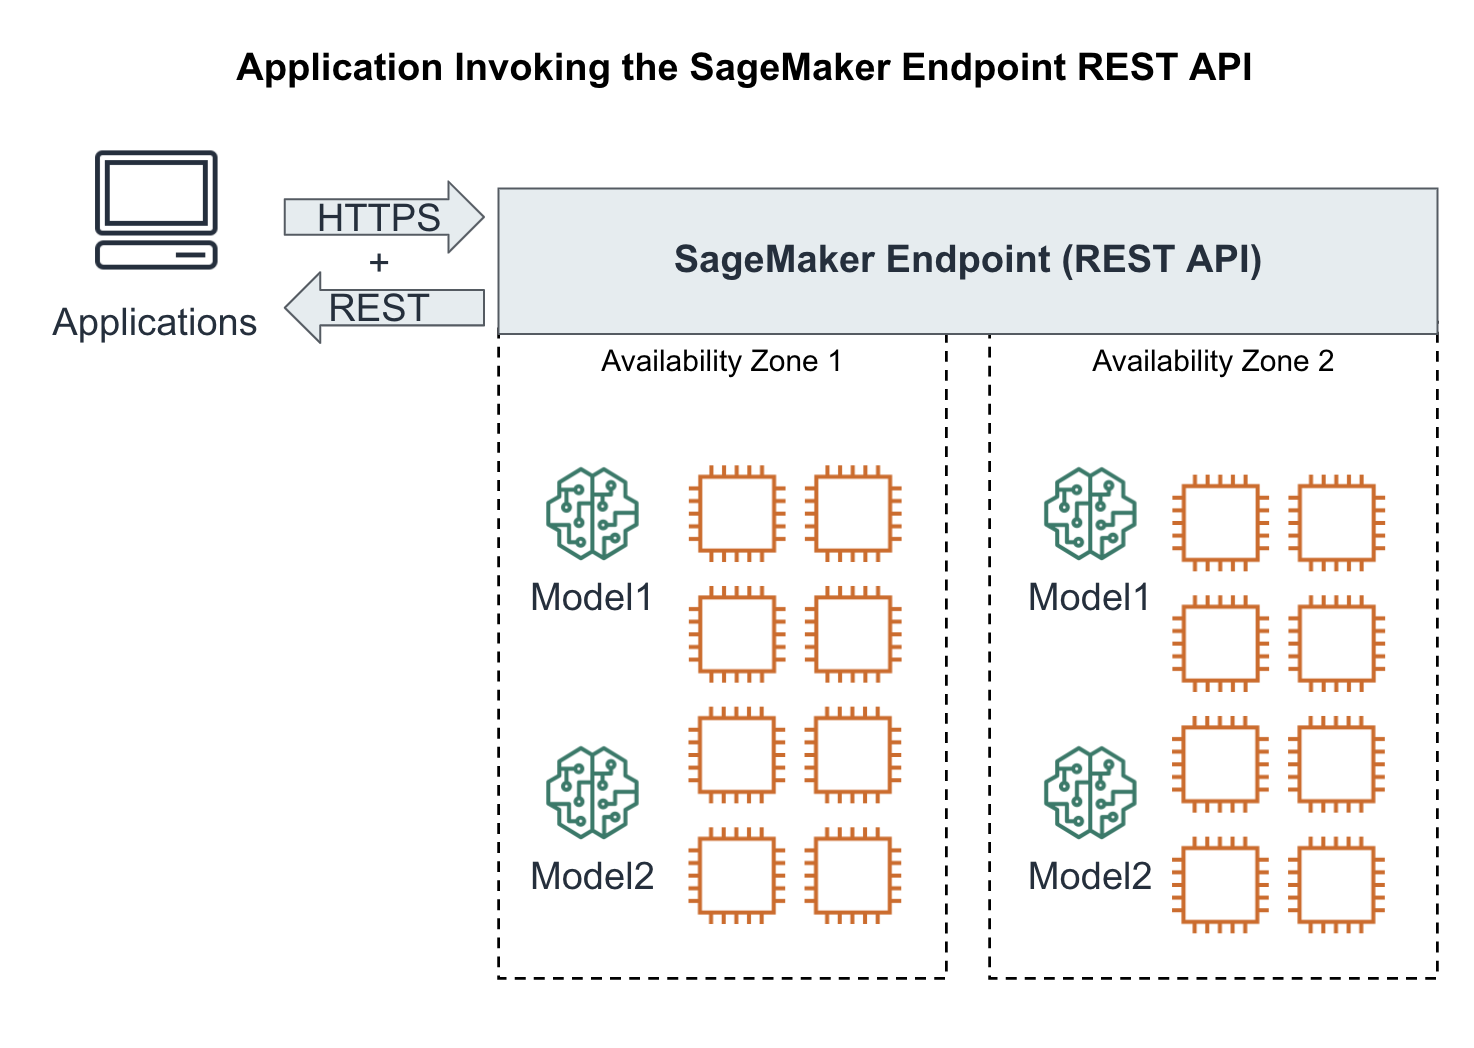 Application invoking our highly available model as a REST endpoint